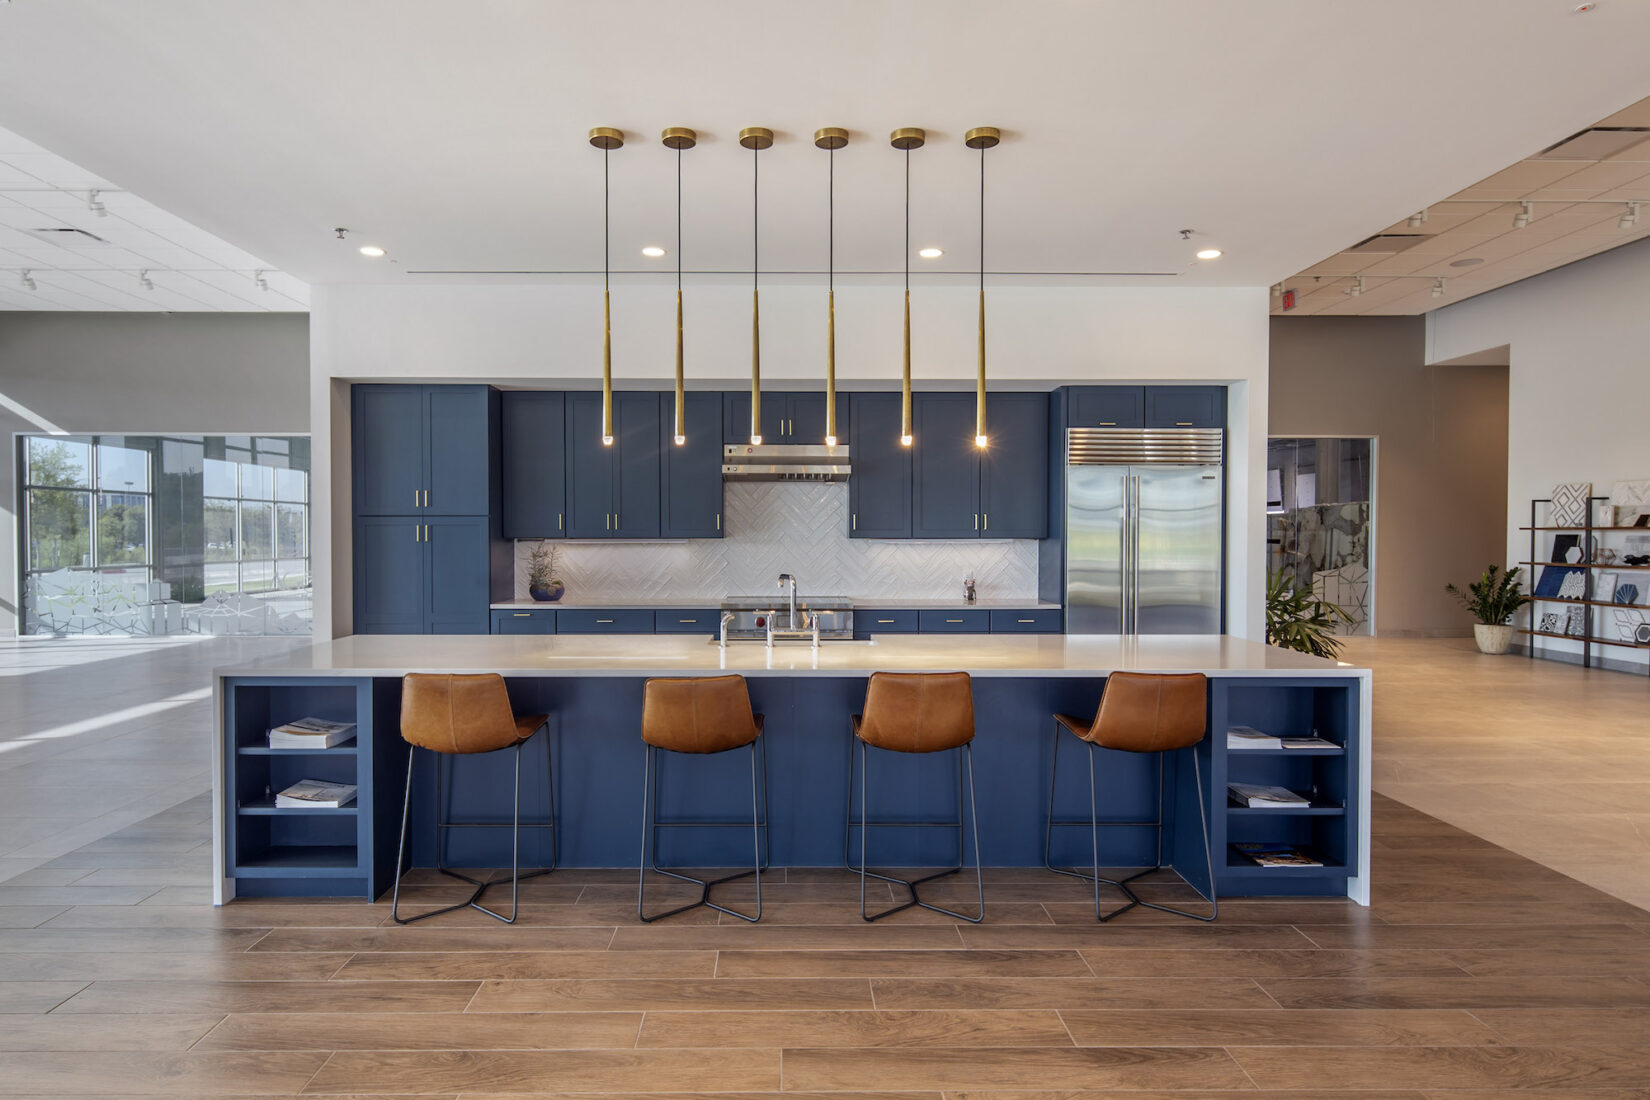 Home Kitchen with Blue Island and Brown Seating